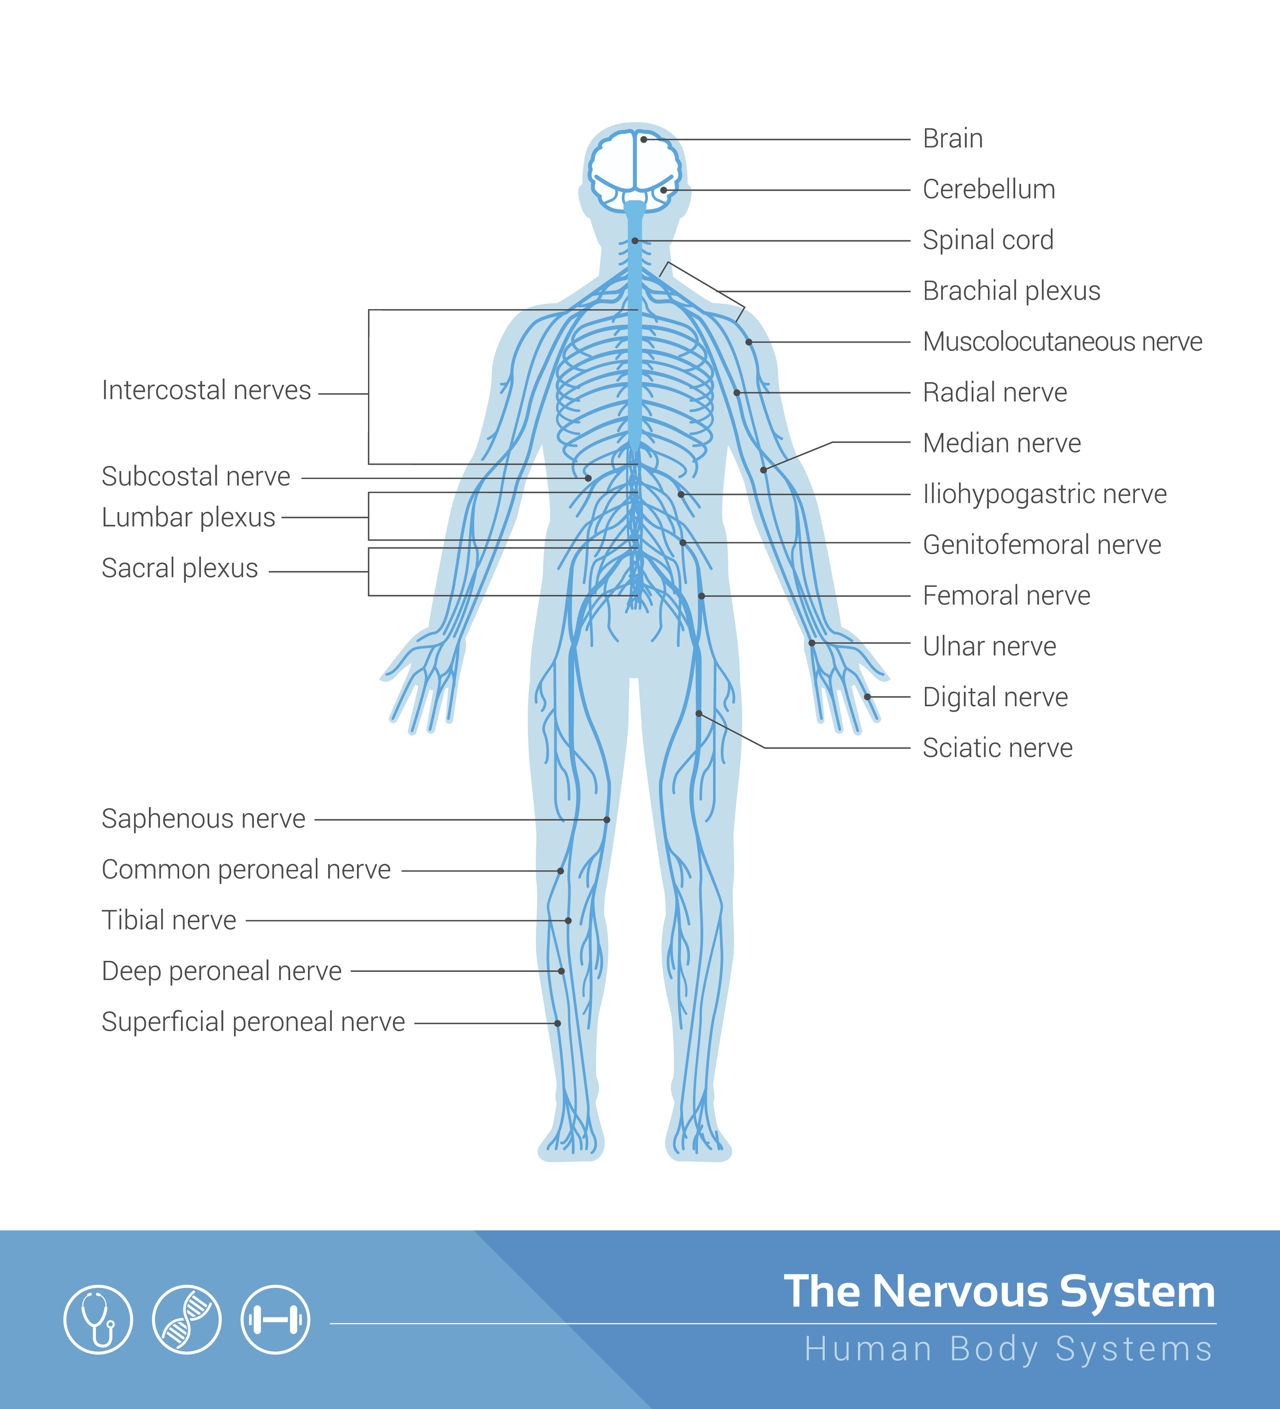 Human Nervous System Structure and Functions Explained With Diagrams (2022)